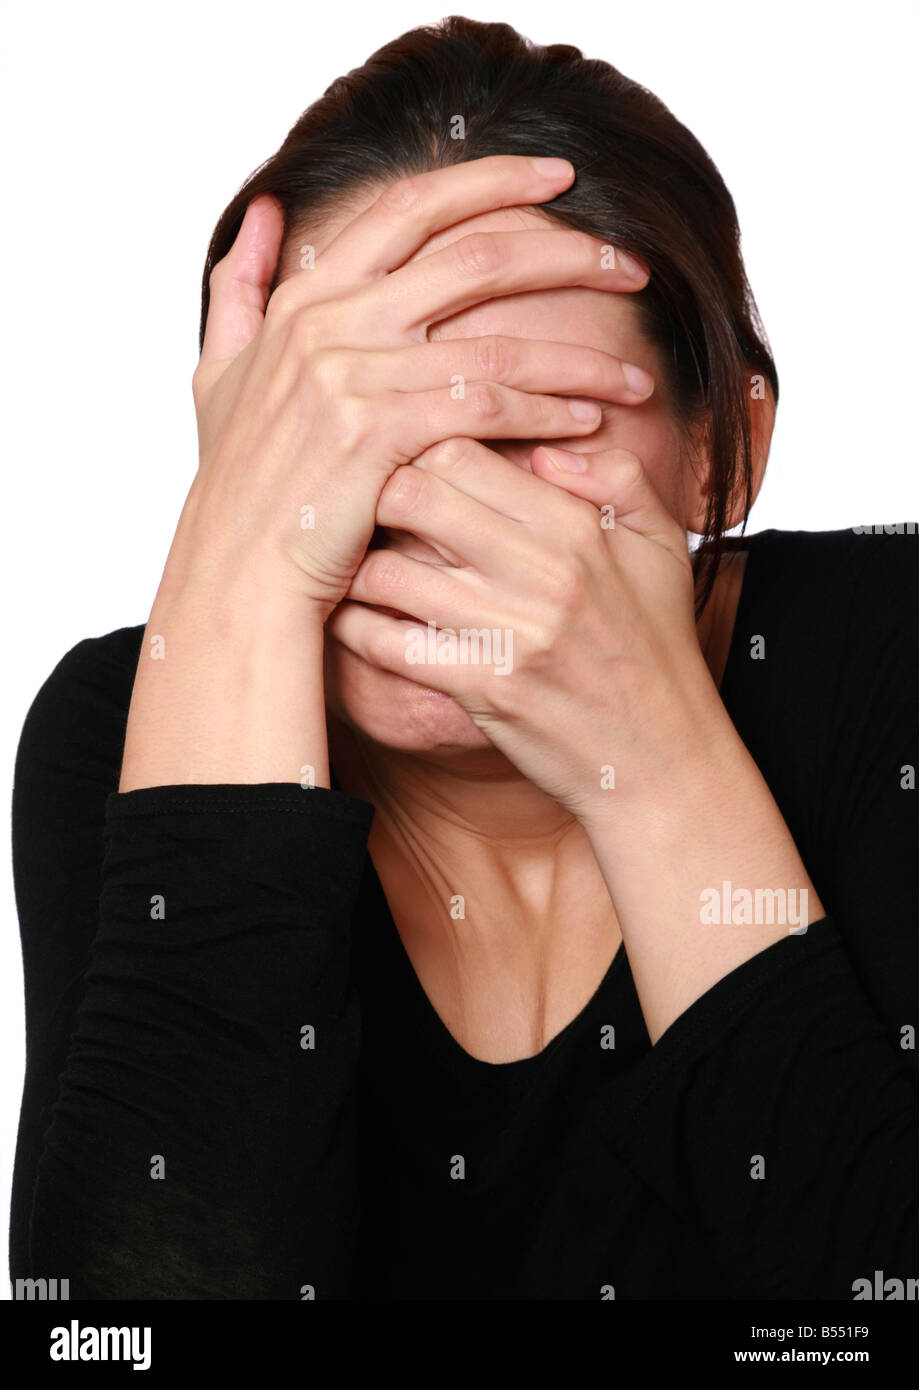 woman too scared to look Stock Photo - Alamy